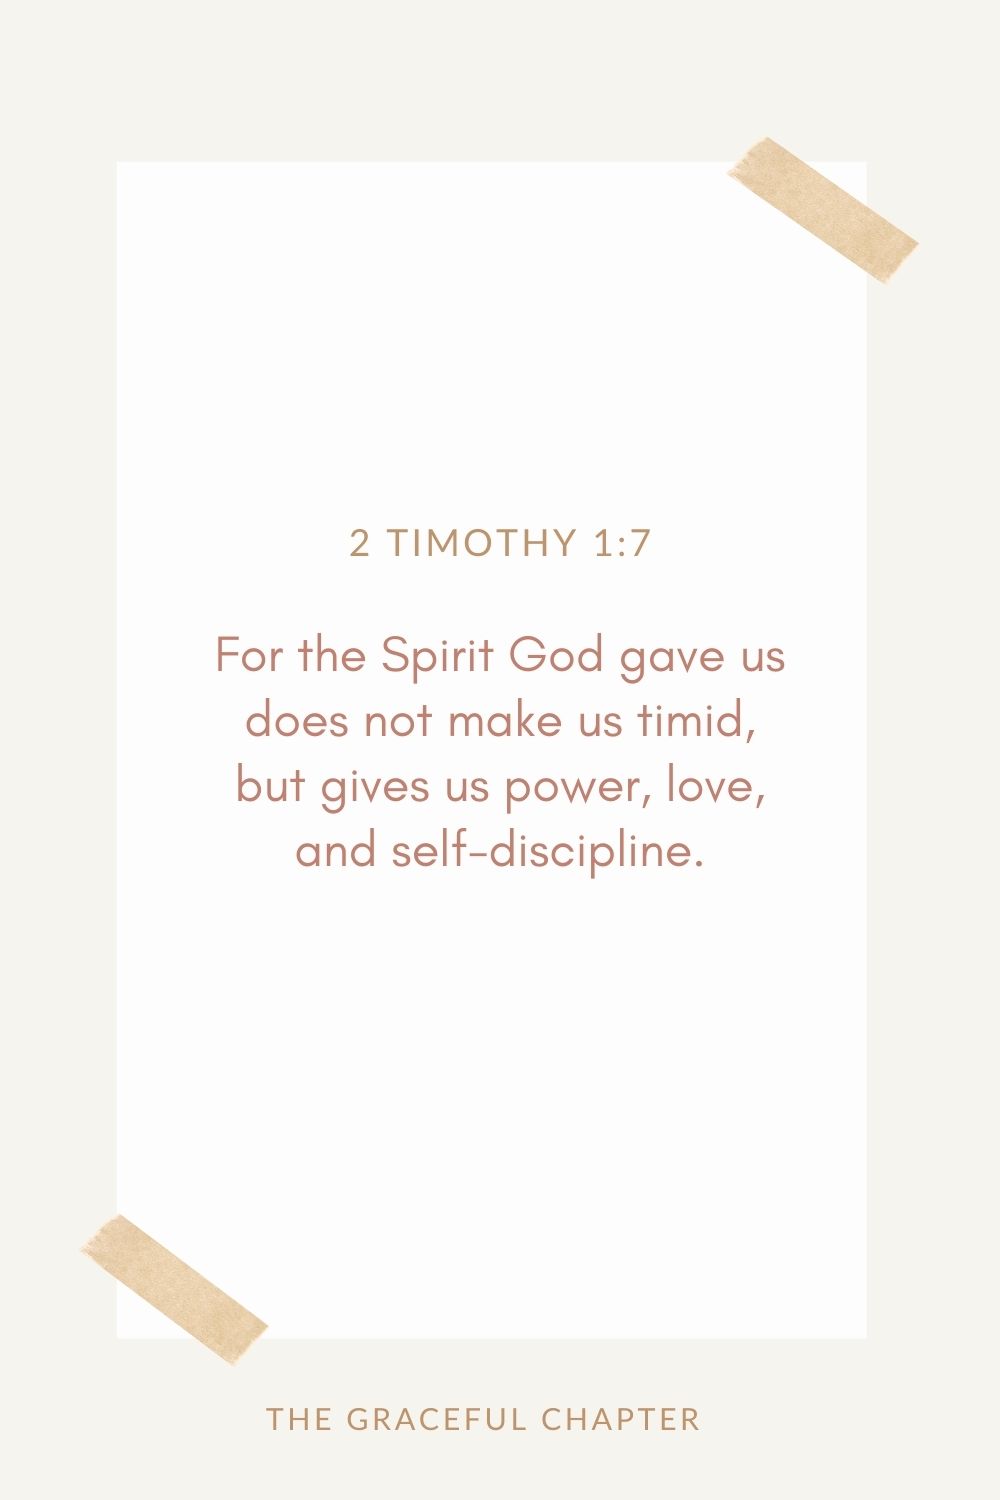 For the Spirit God gave us does not make us timid, but gives us power, love, and self-discipline. 2 Timothy 1:7